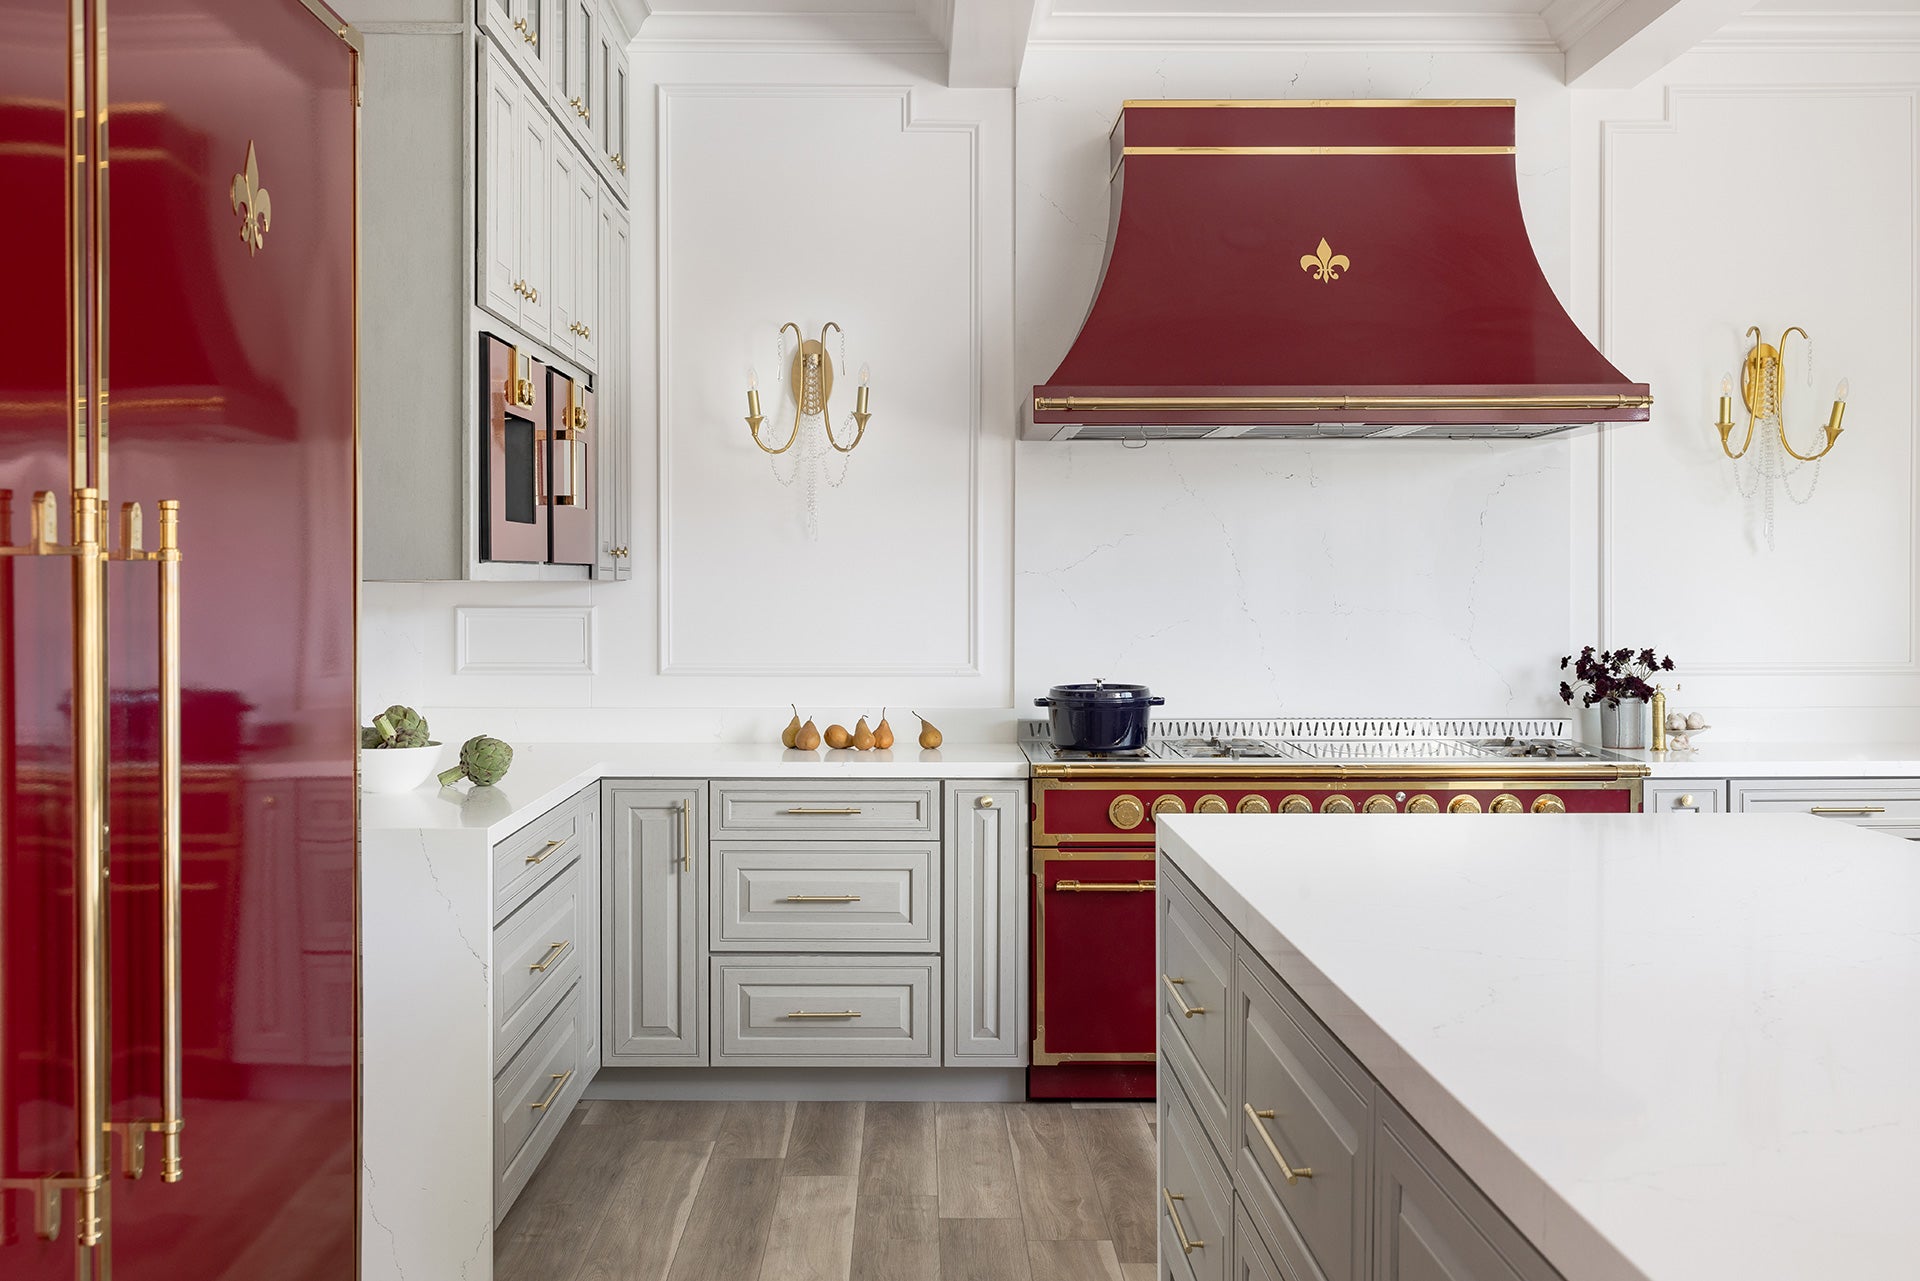 A kitchen with white cabinets and red custom hood